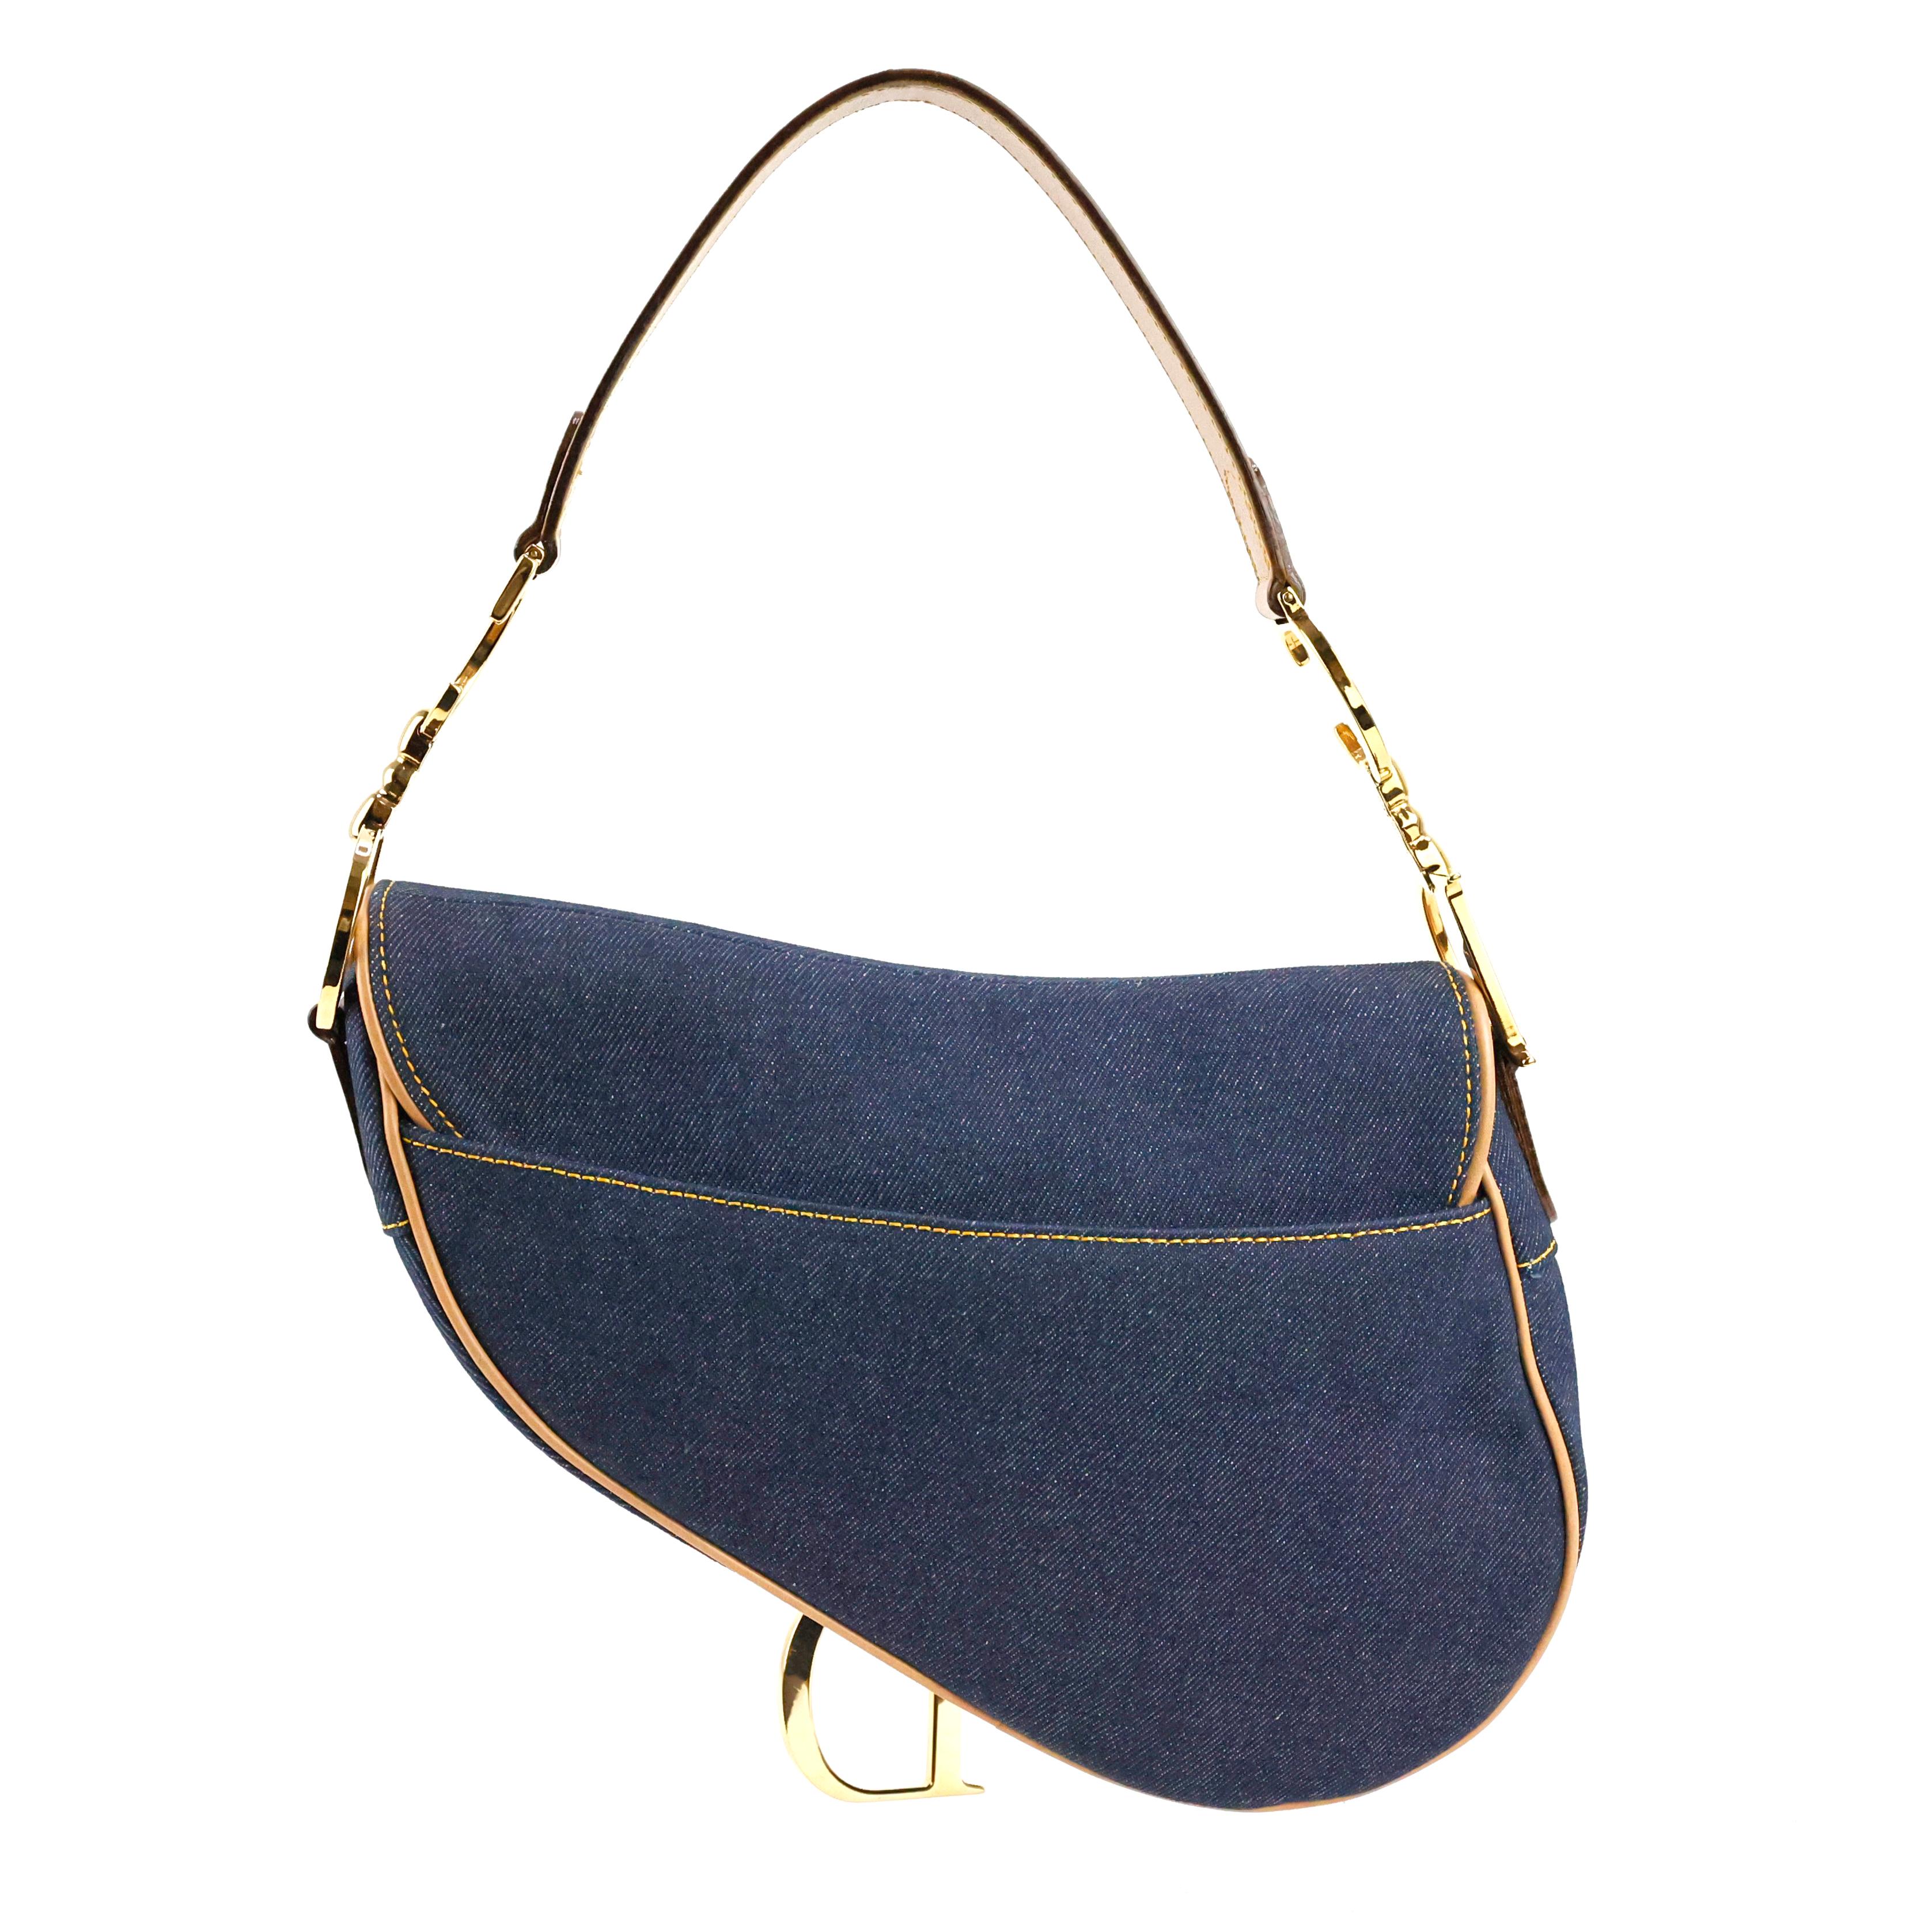 Christian Dior by John Galliano Saddle bag in denim color blue and beige leather, gold hardware. 

Condition: 
Excellent. 

Packing/accessories: 
Box, dustbag and authenticity card.

Measurements:
24cm x 18cm x 5cm